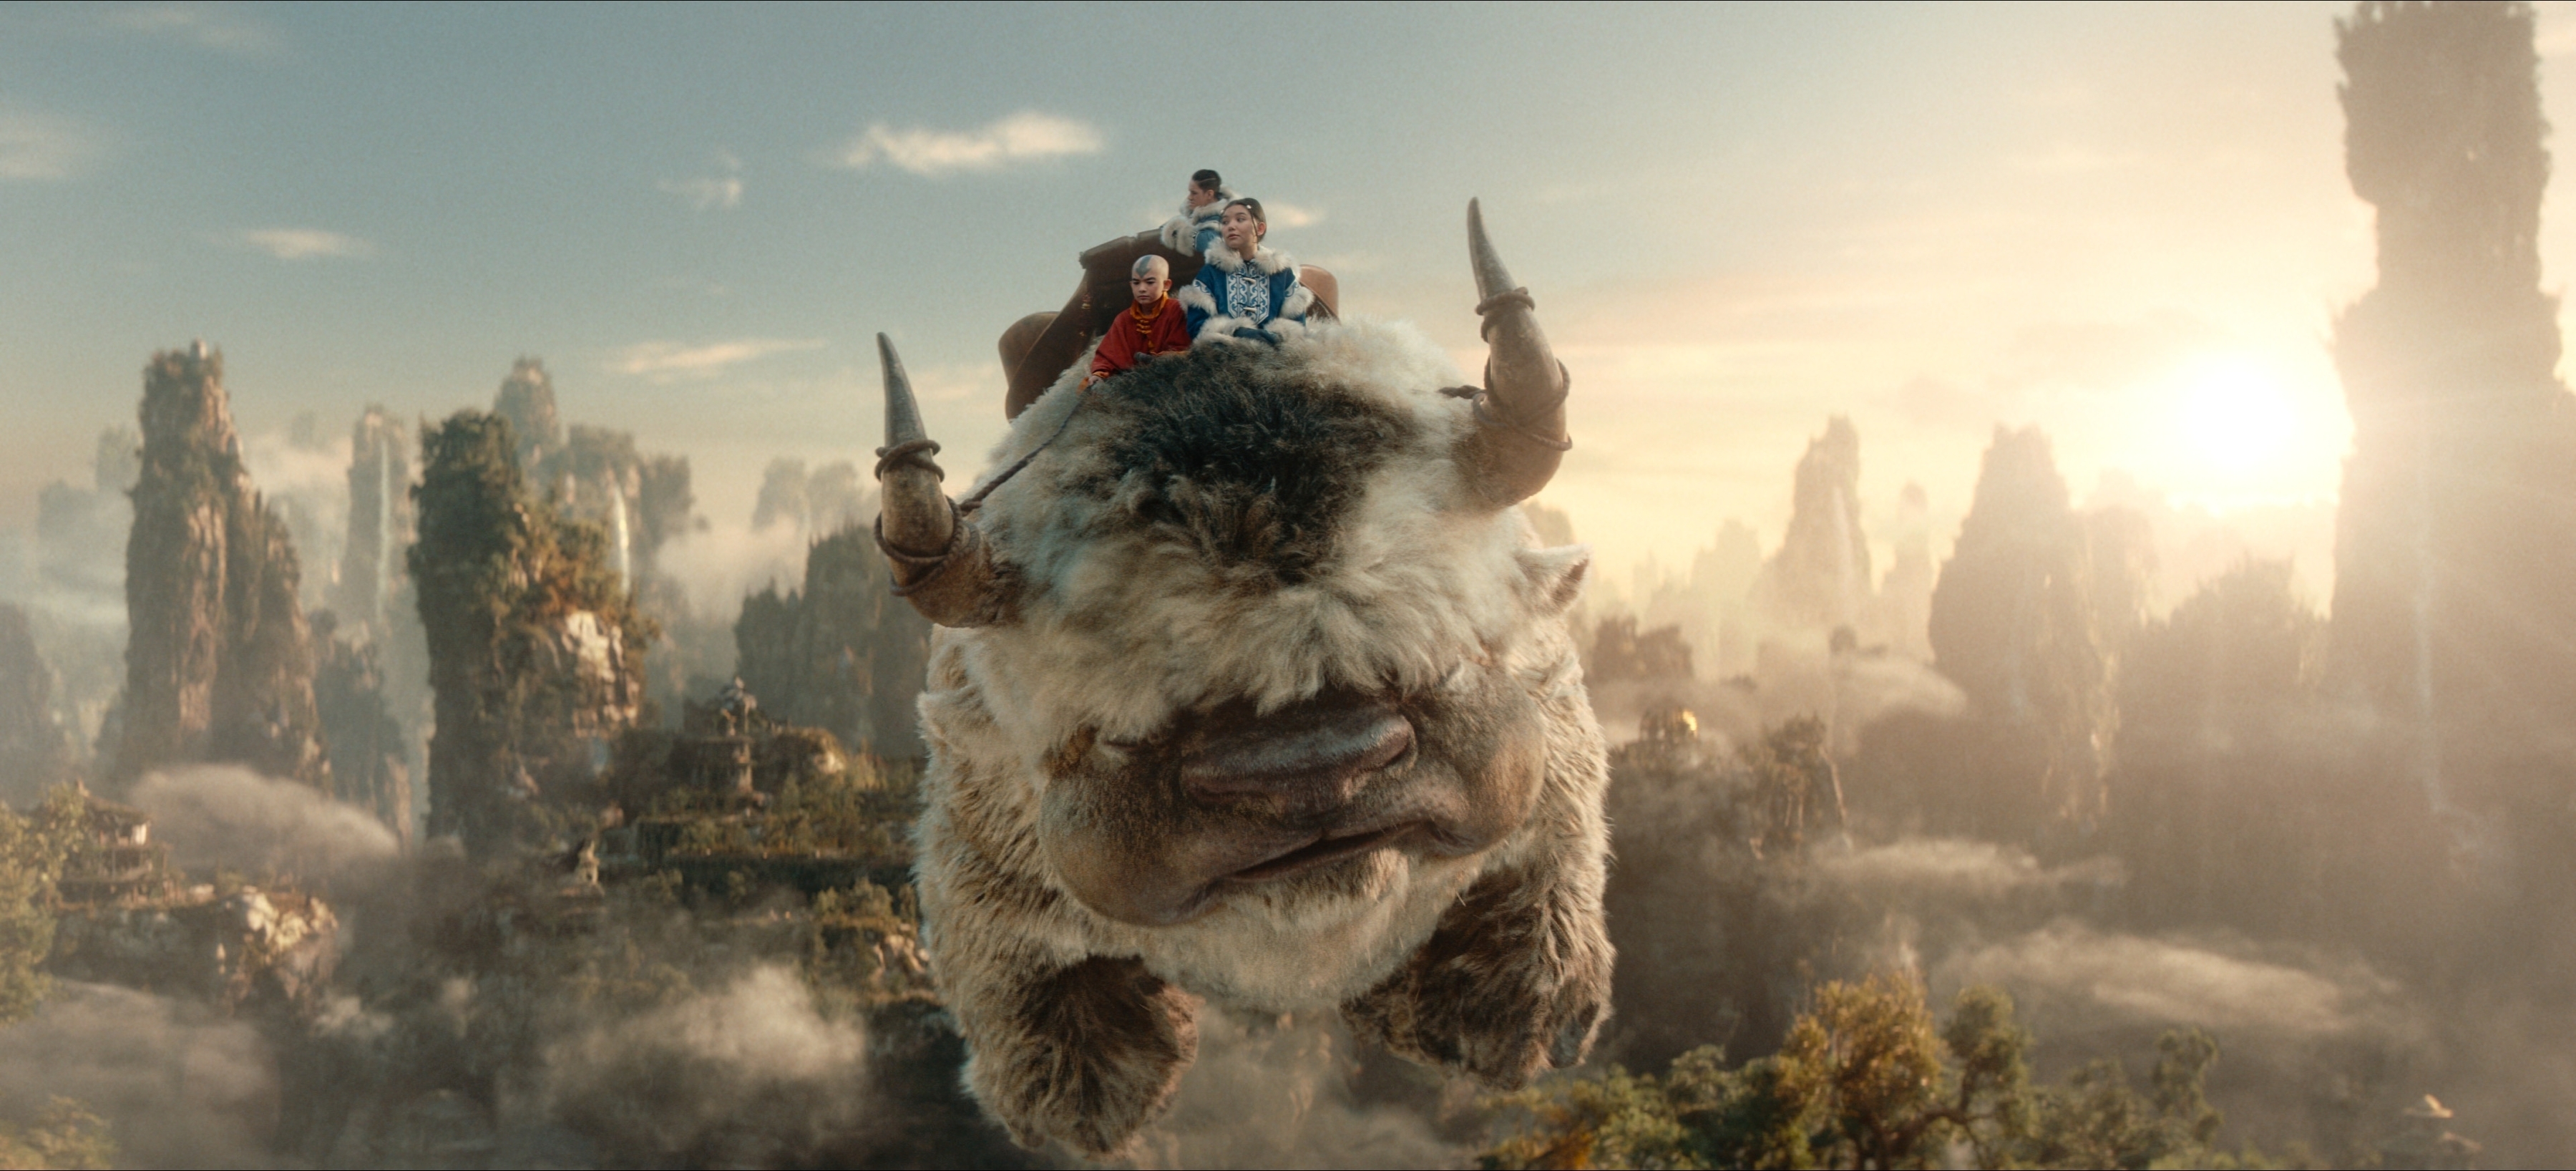 A group of animated characters riding on a flying bison above a forested landscape